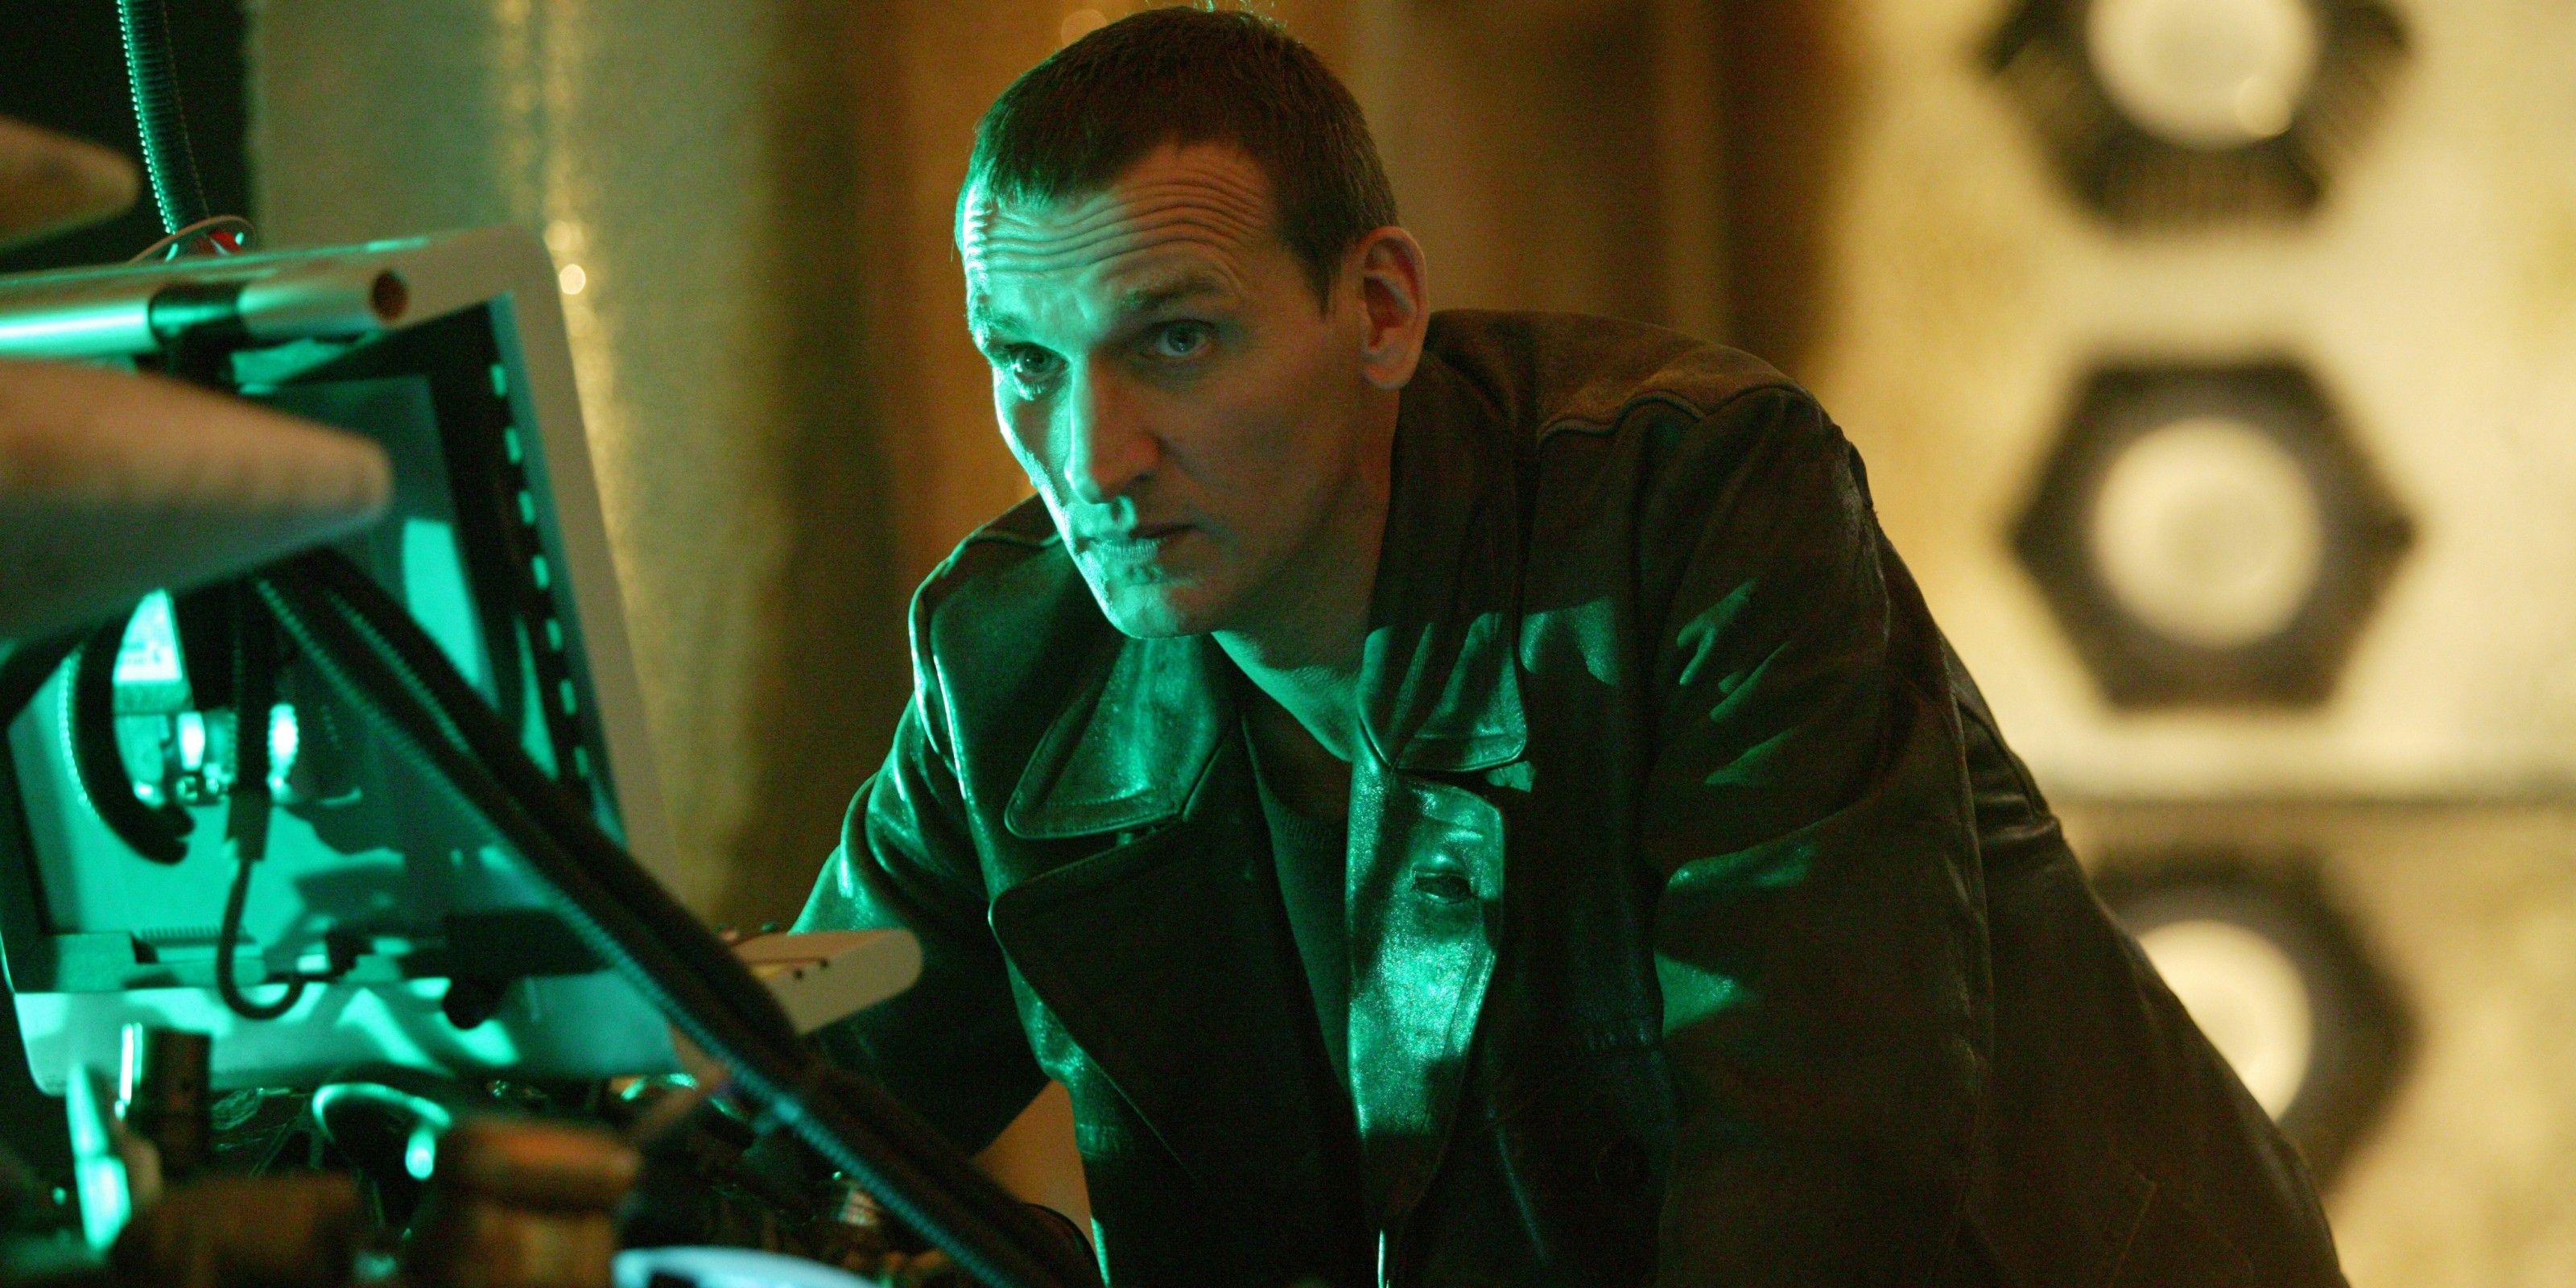 Reasons for Ninth Doctor's departure, Christopher Eccleston's decision, Behind-the-scenes drama, Doctor Who production, 3200x1600 Dual Screen Desktop